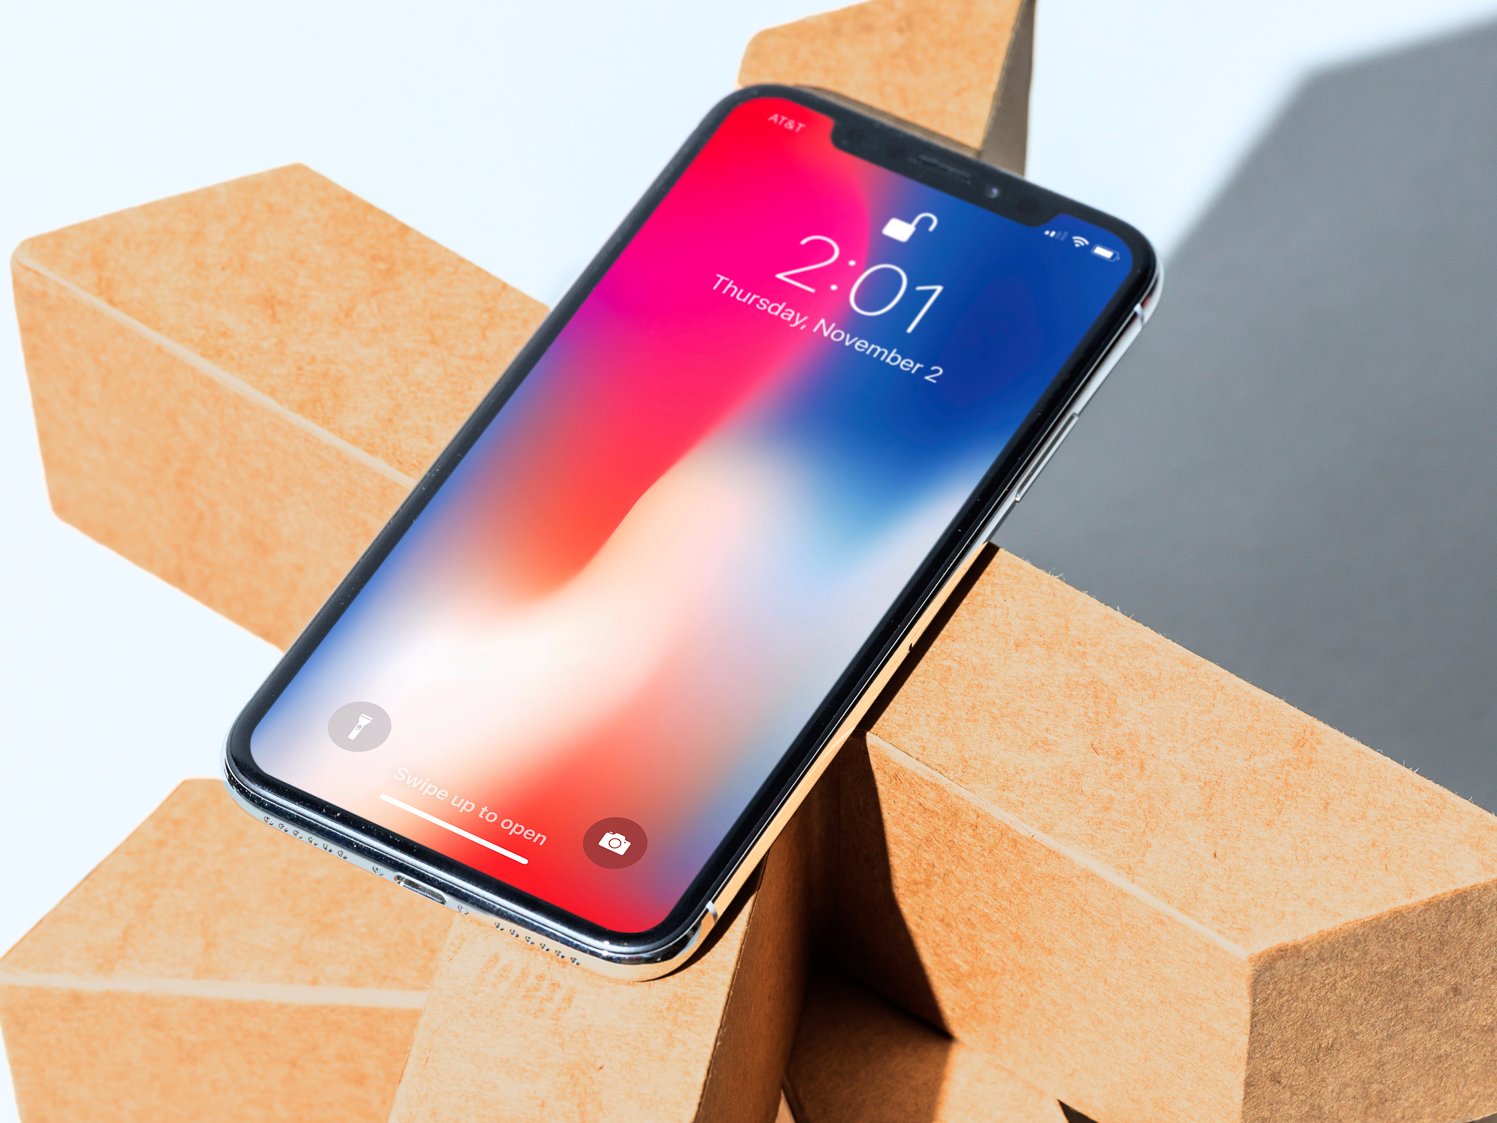 Wall Street Analyst Predicts Apple Will Launch A Supersized iPhone X Next Year